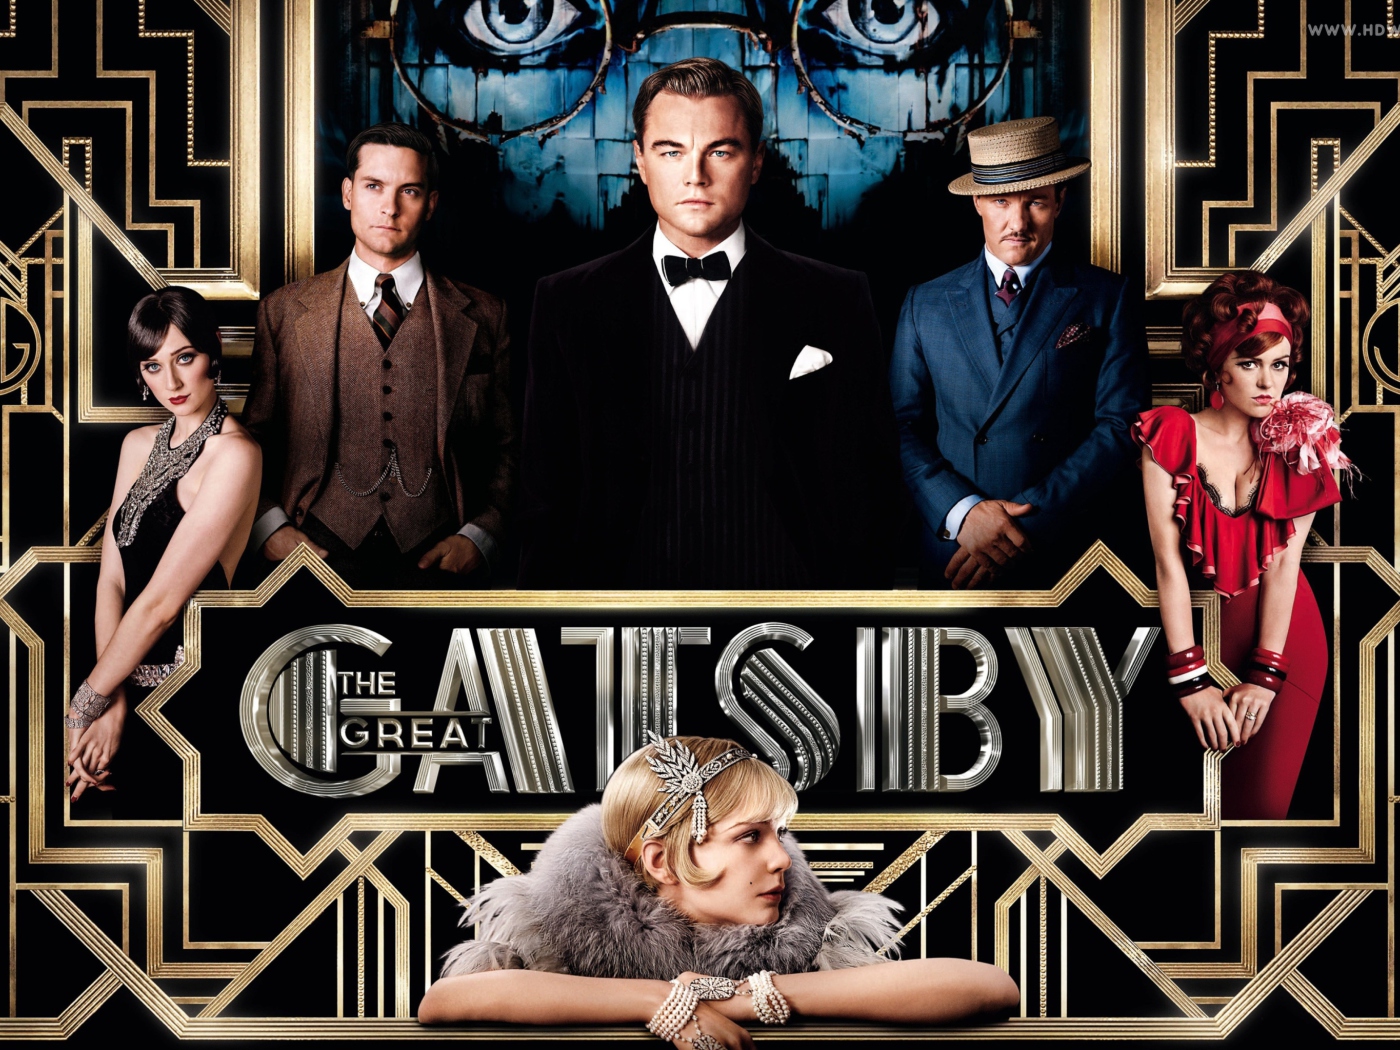 The Great Gatsby Movie wallpaper 1400x1050